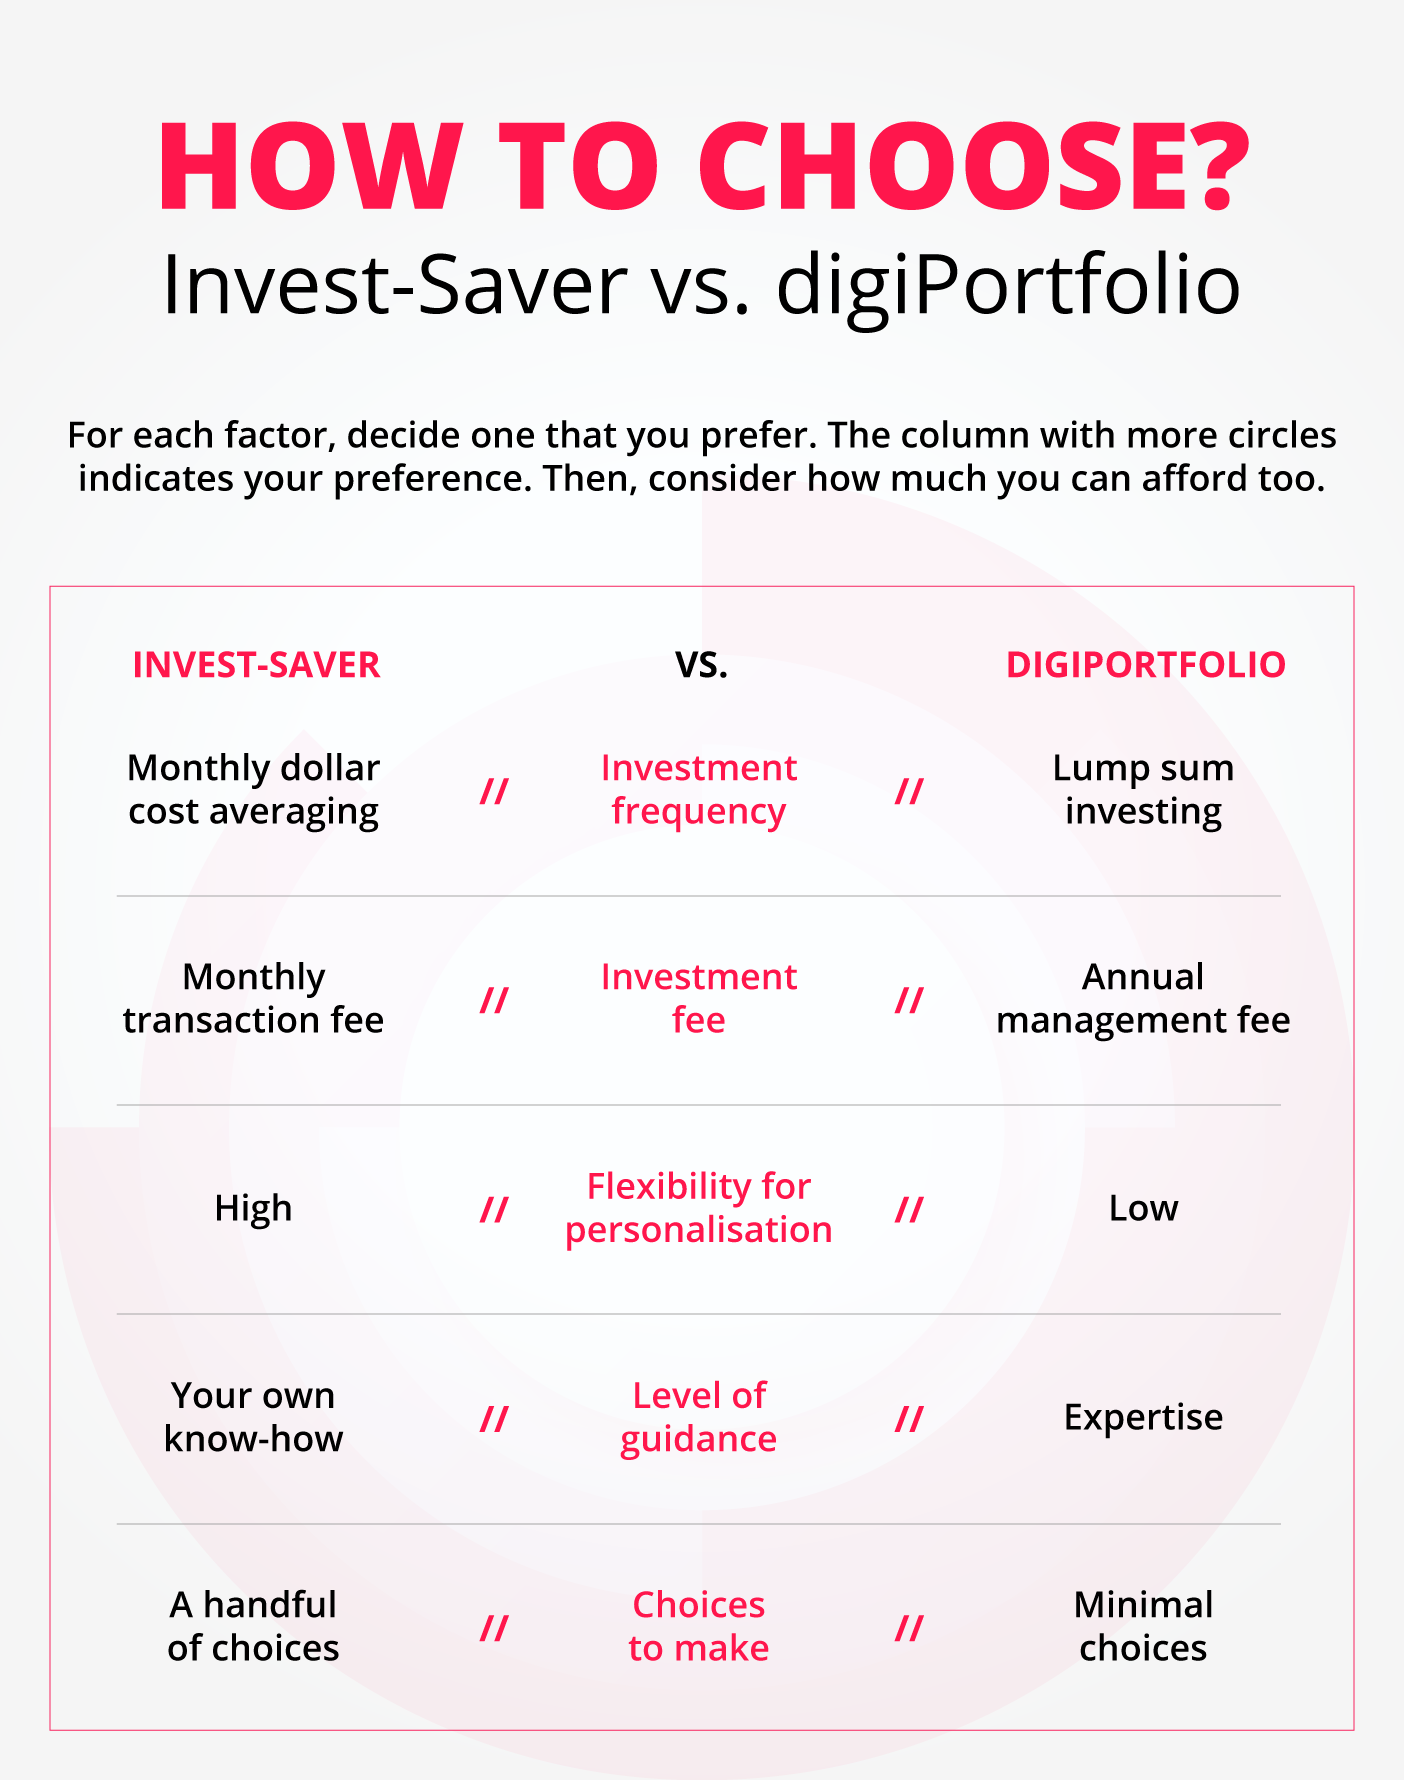 Is Invest-Saver or digiPortfolio for me?